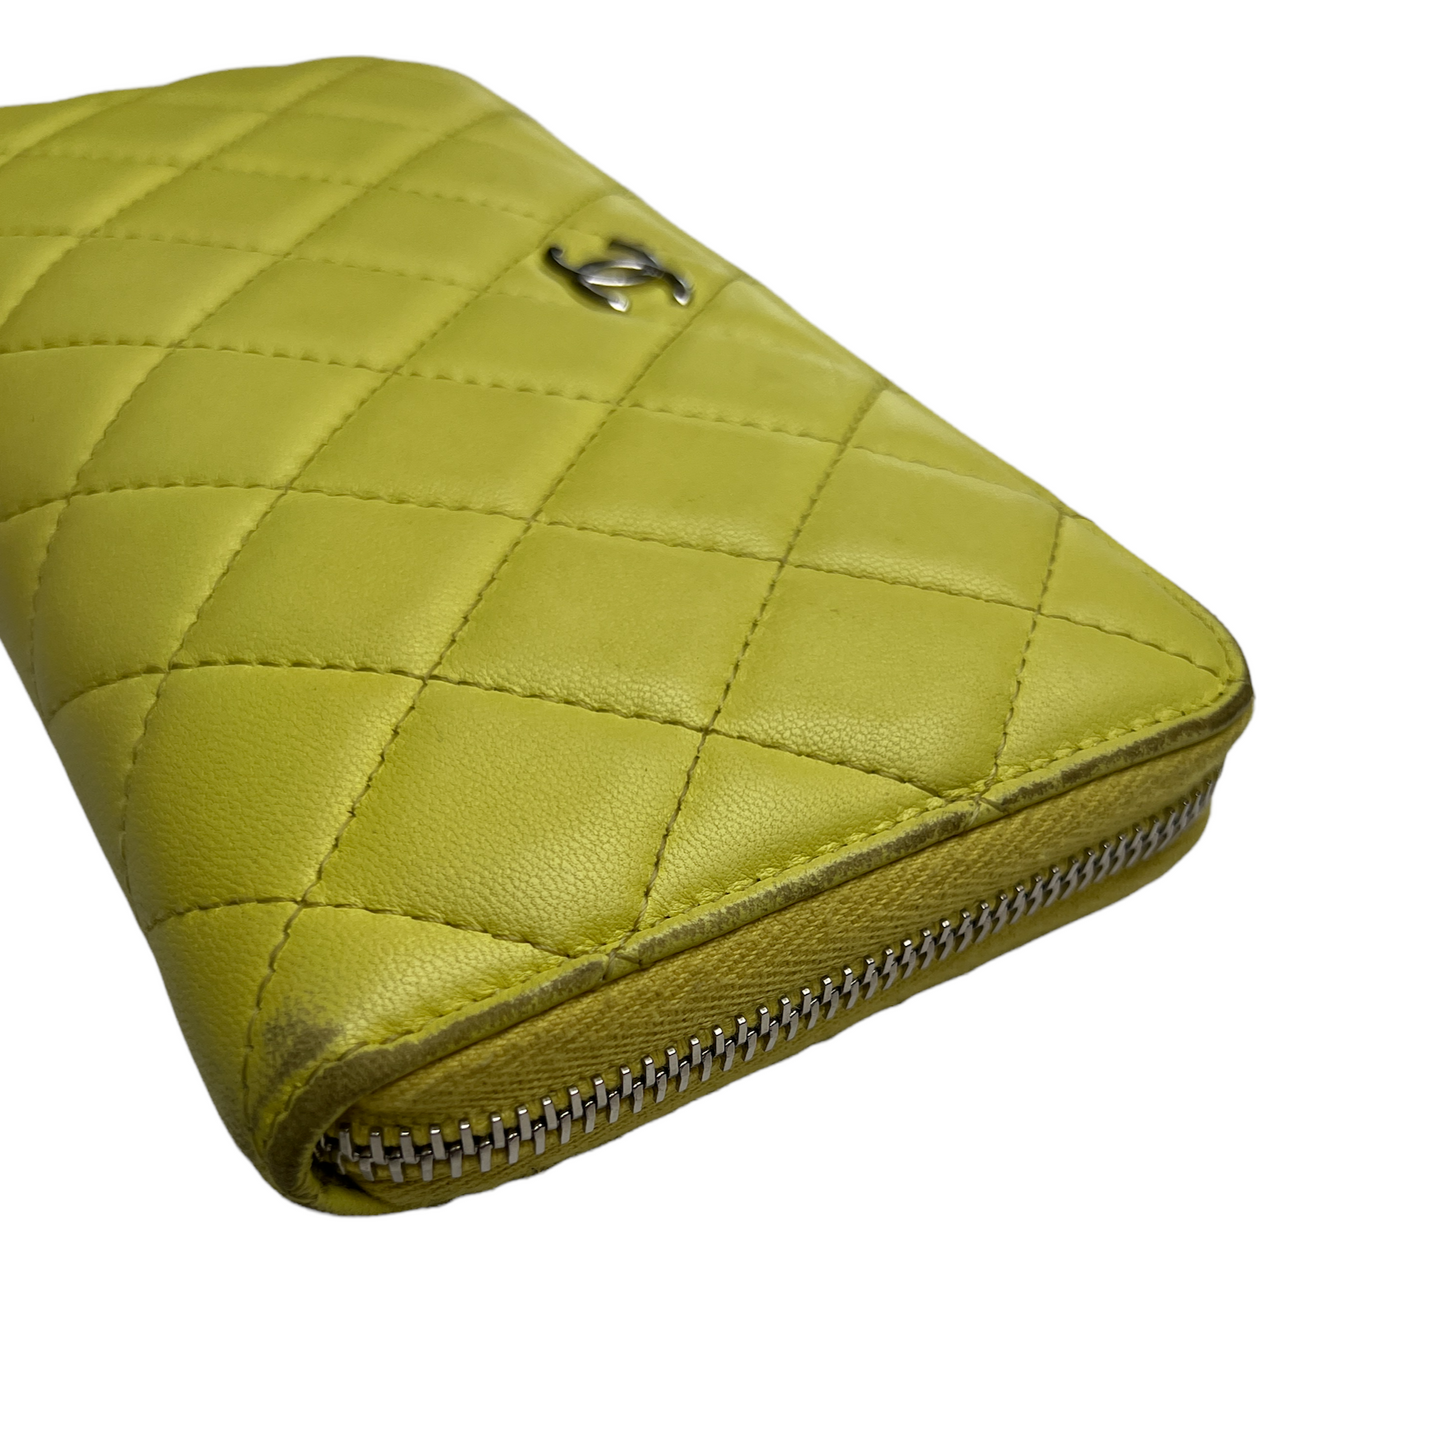 2021 Yellow Continental Wallet